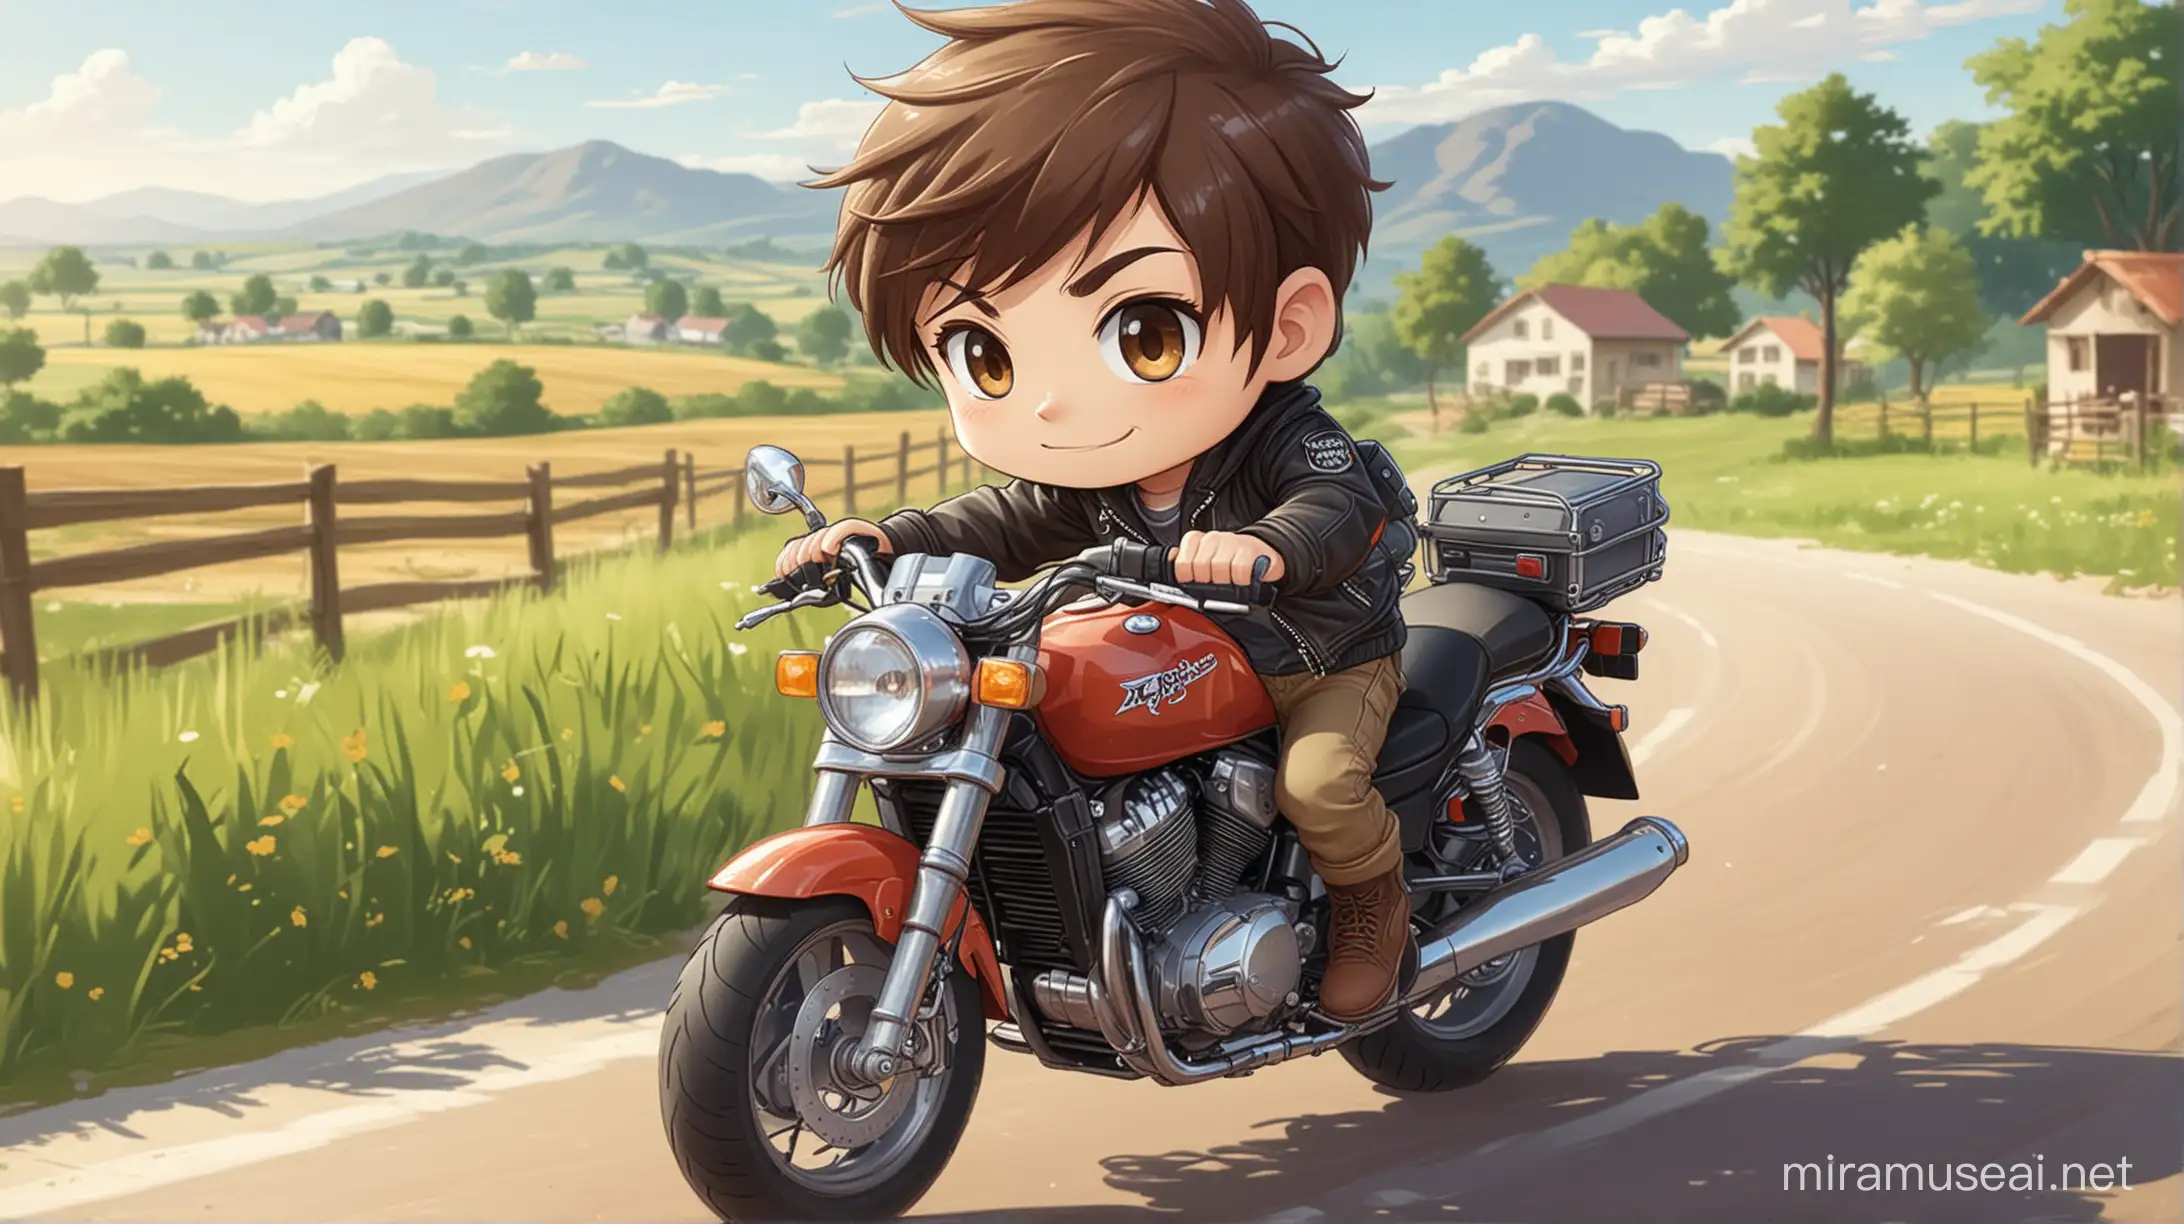 Chibi Male Friend Riding Motorcycle on Sunny Rural Road